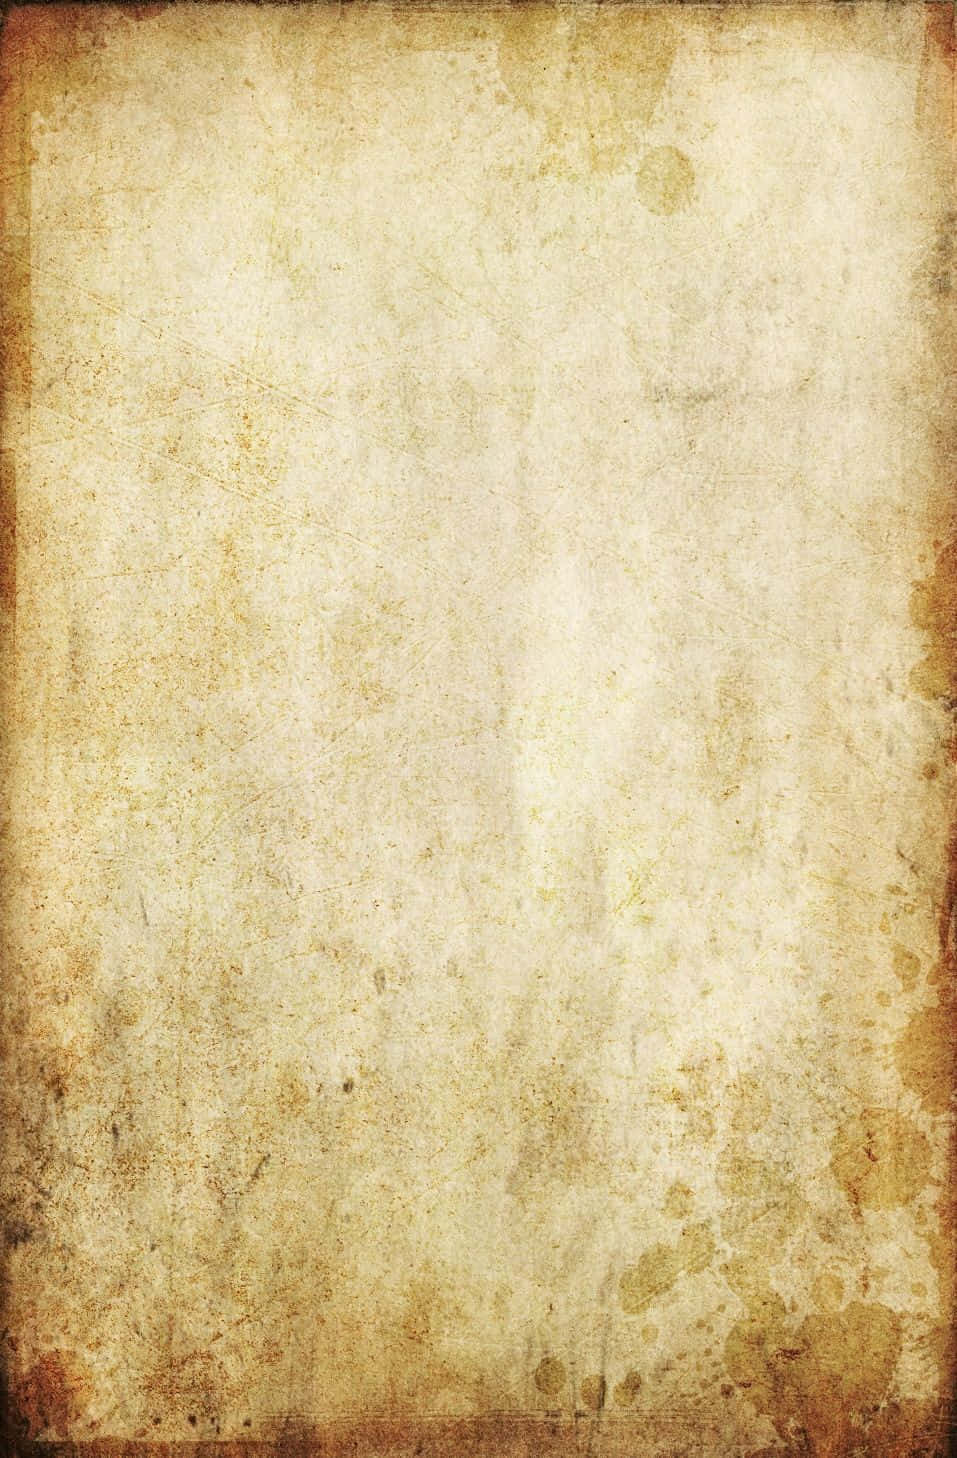 An aged and weathered vintage paper background